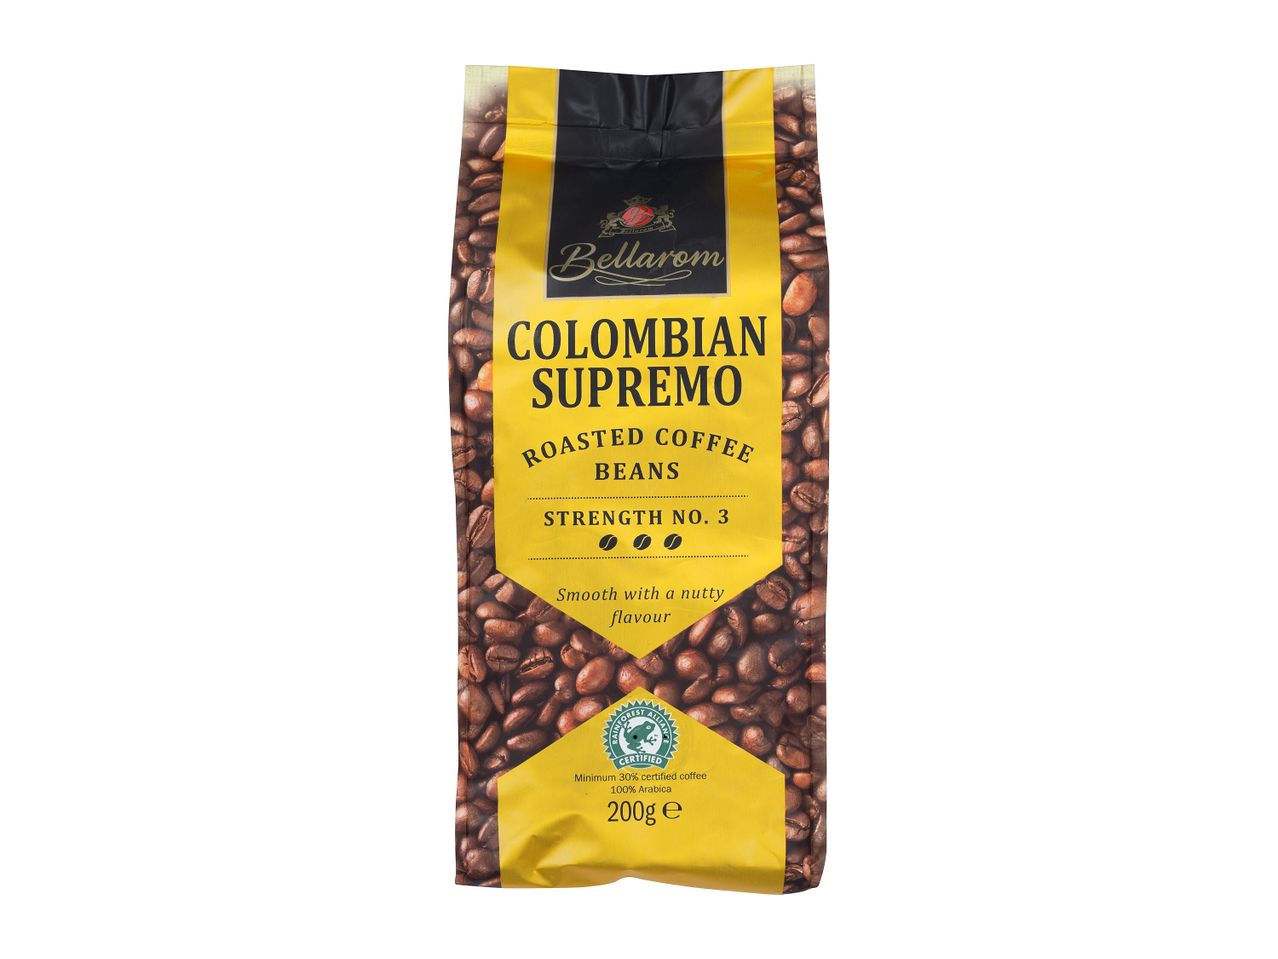 Go to full screen view: Bellarom Roasted Coffee Beans - Image 1